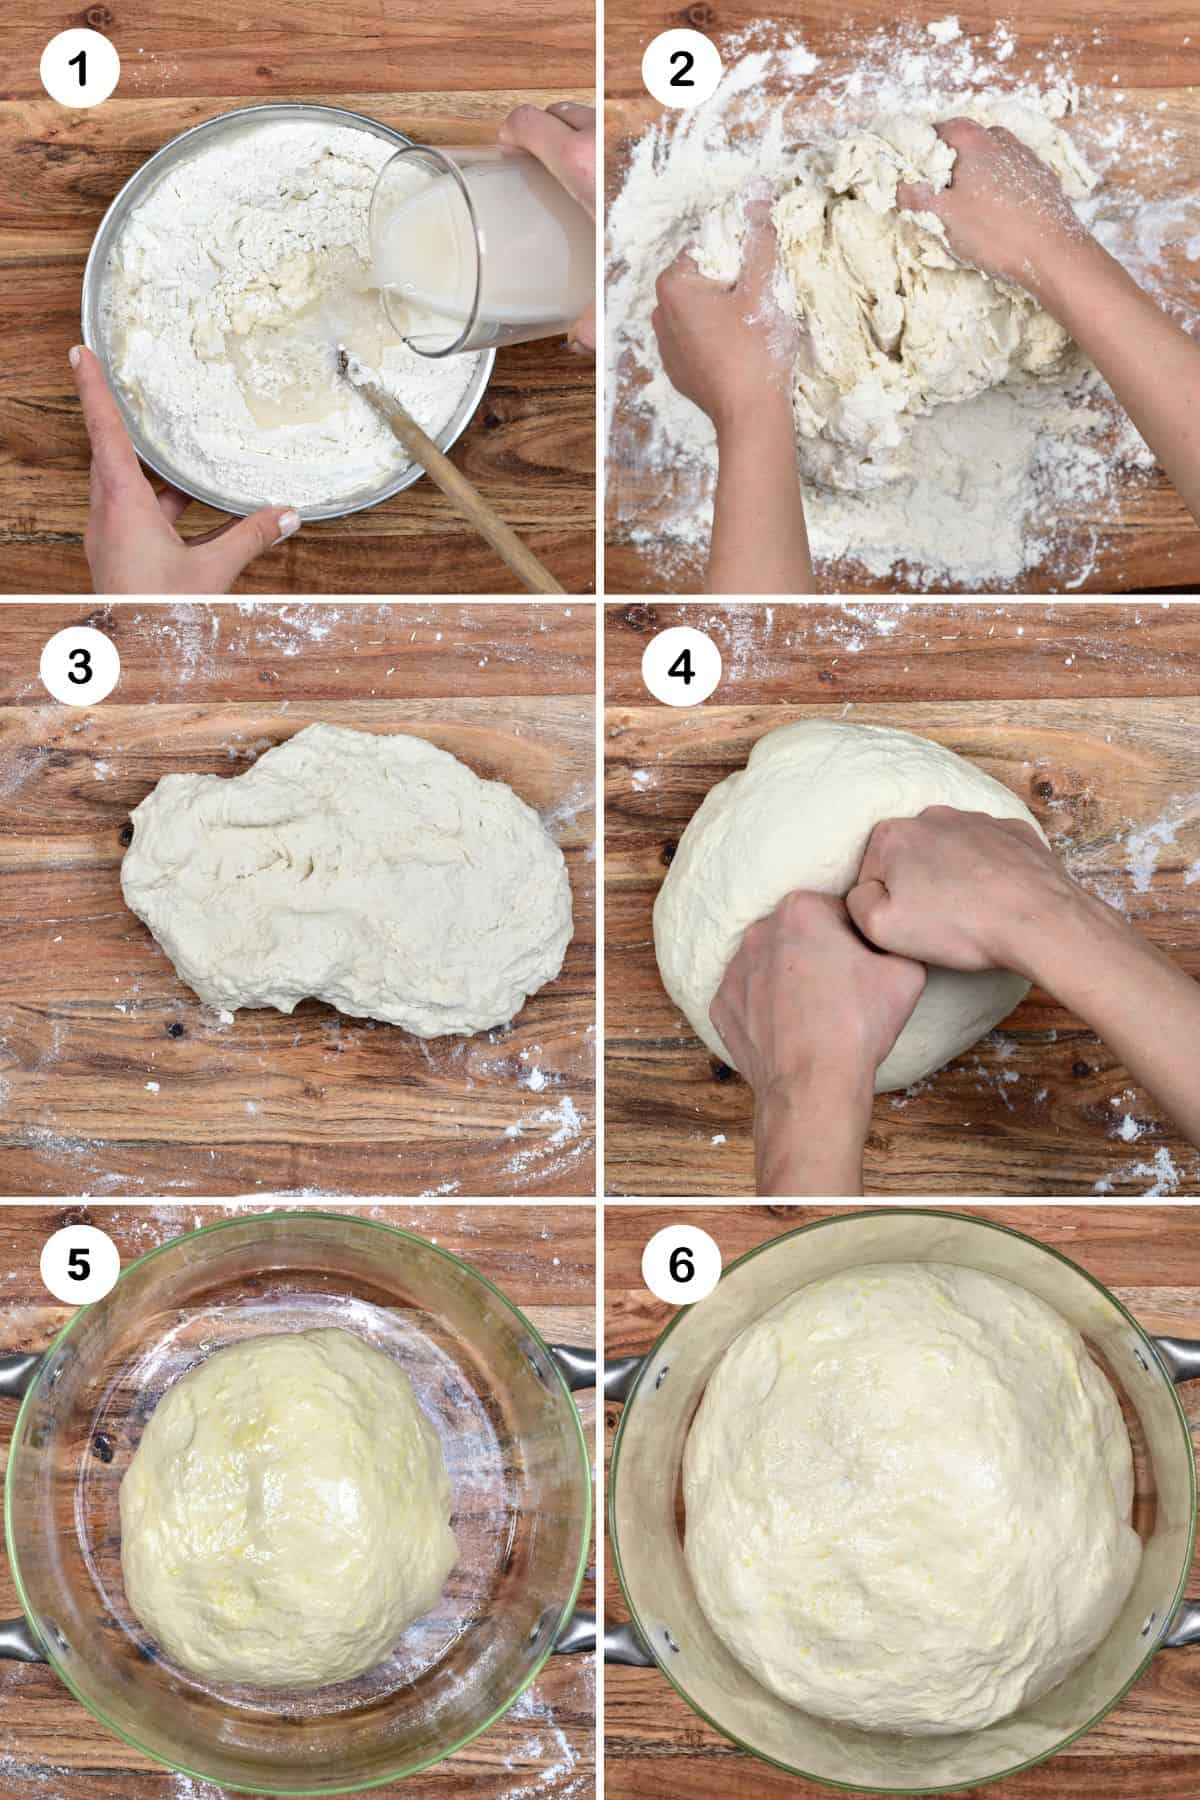 Steps for kneading and rising dough